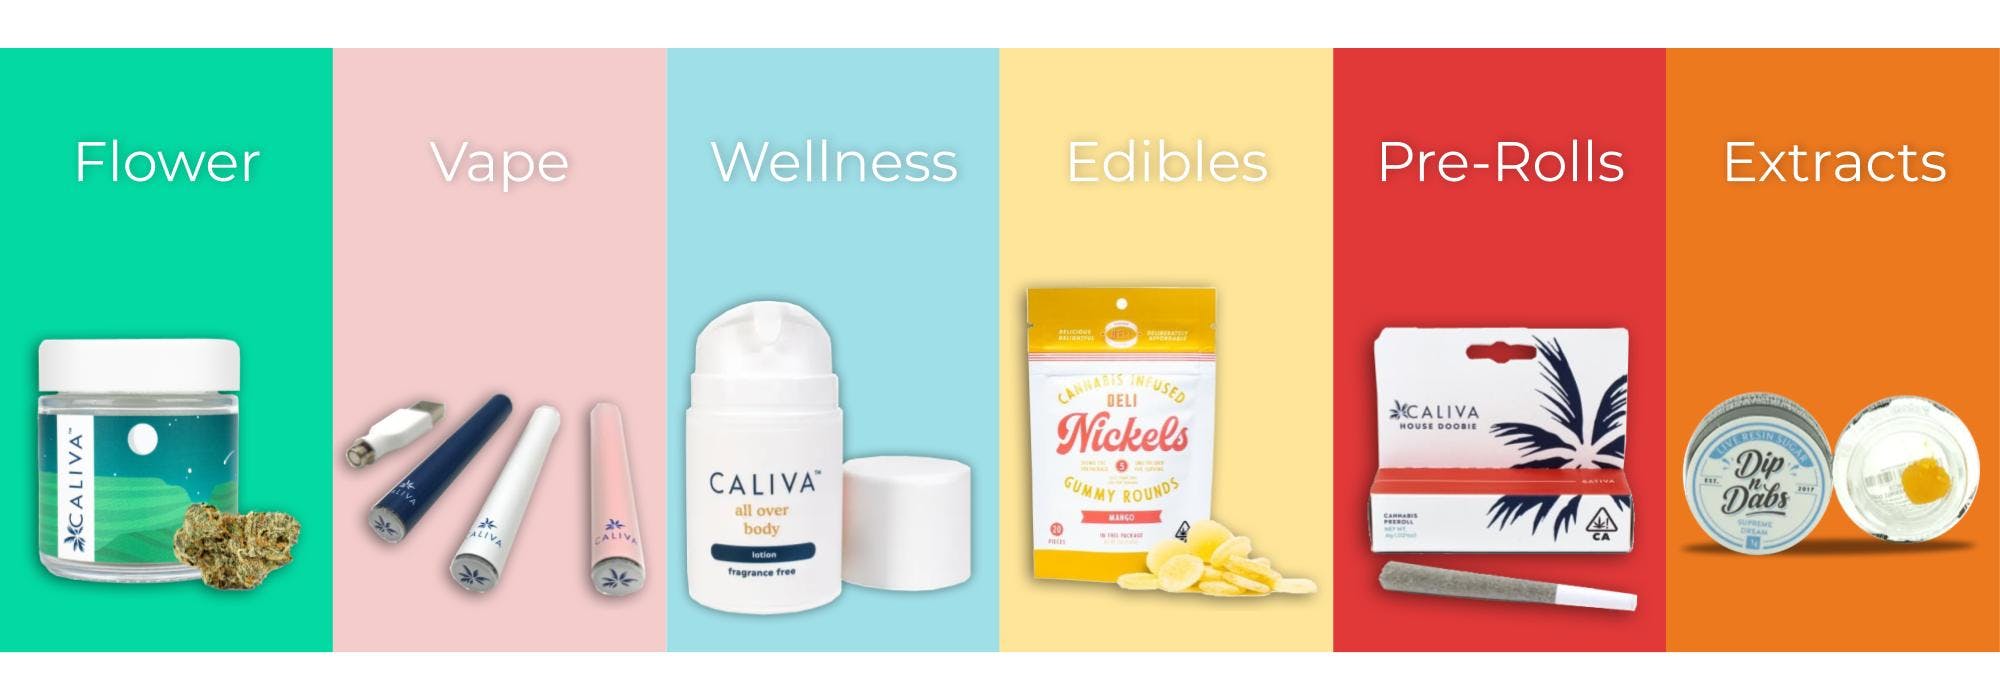 Caliva offers a wide range of popular products including flower, vapes, wellness products, edibles, pre-rolls, and extracts.